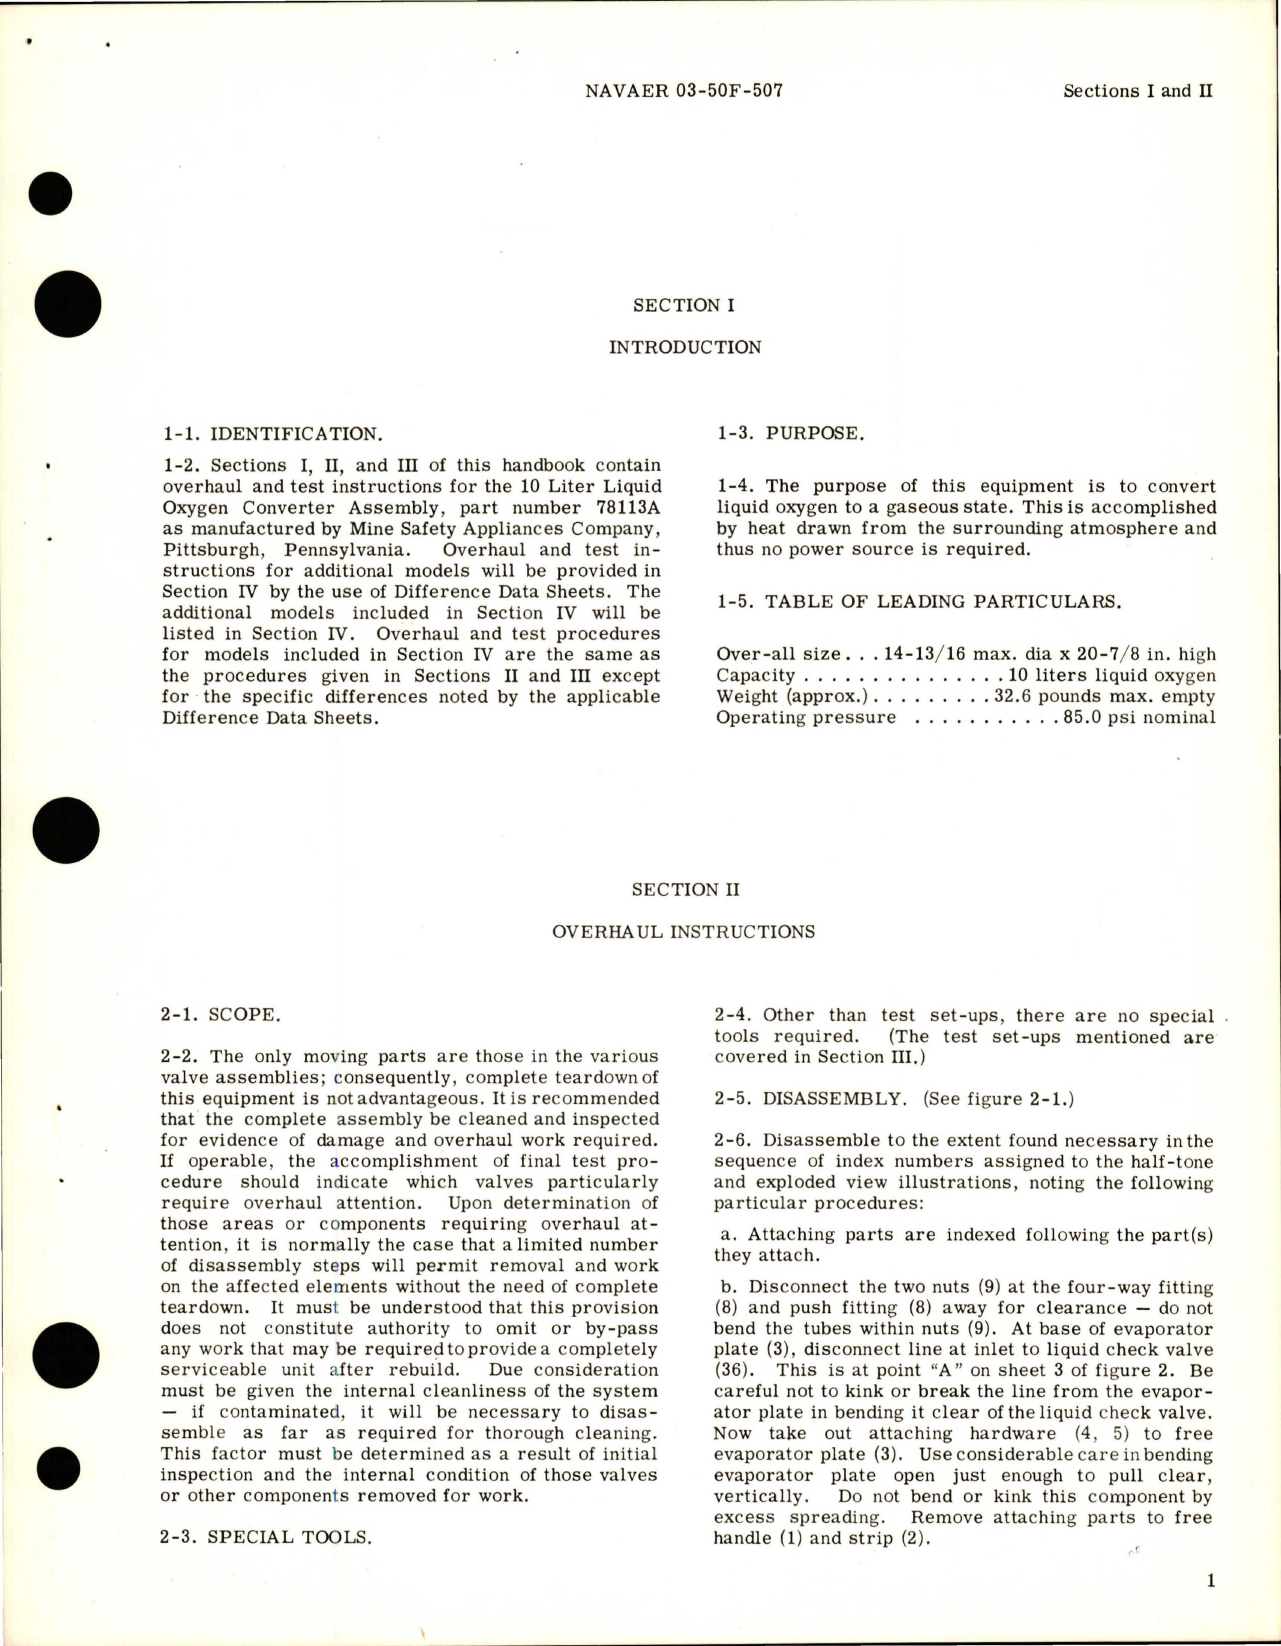 Sample page 5 from AirCorps Library document: Overhaul Instructions for Liquid Oxygen Converter Assembly - 78113-A 